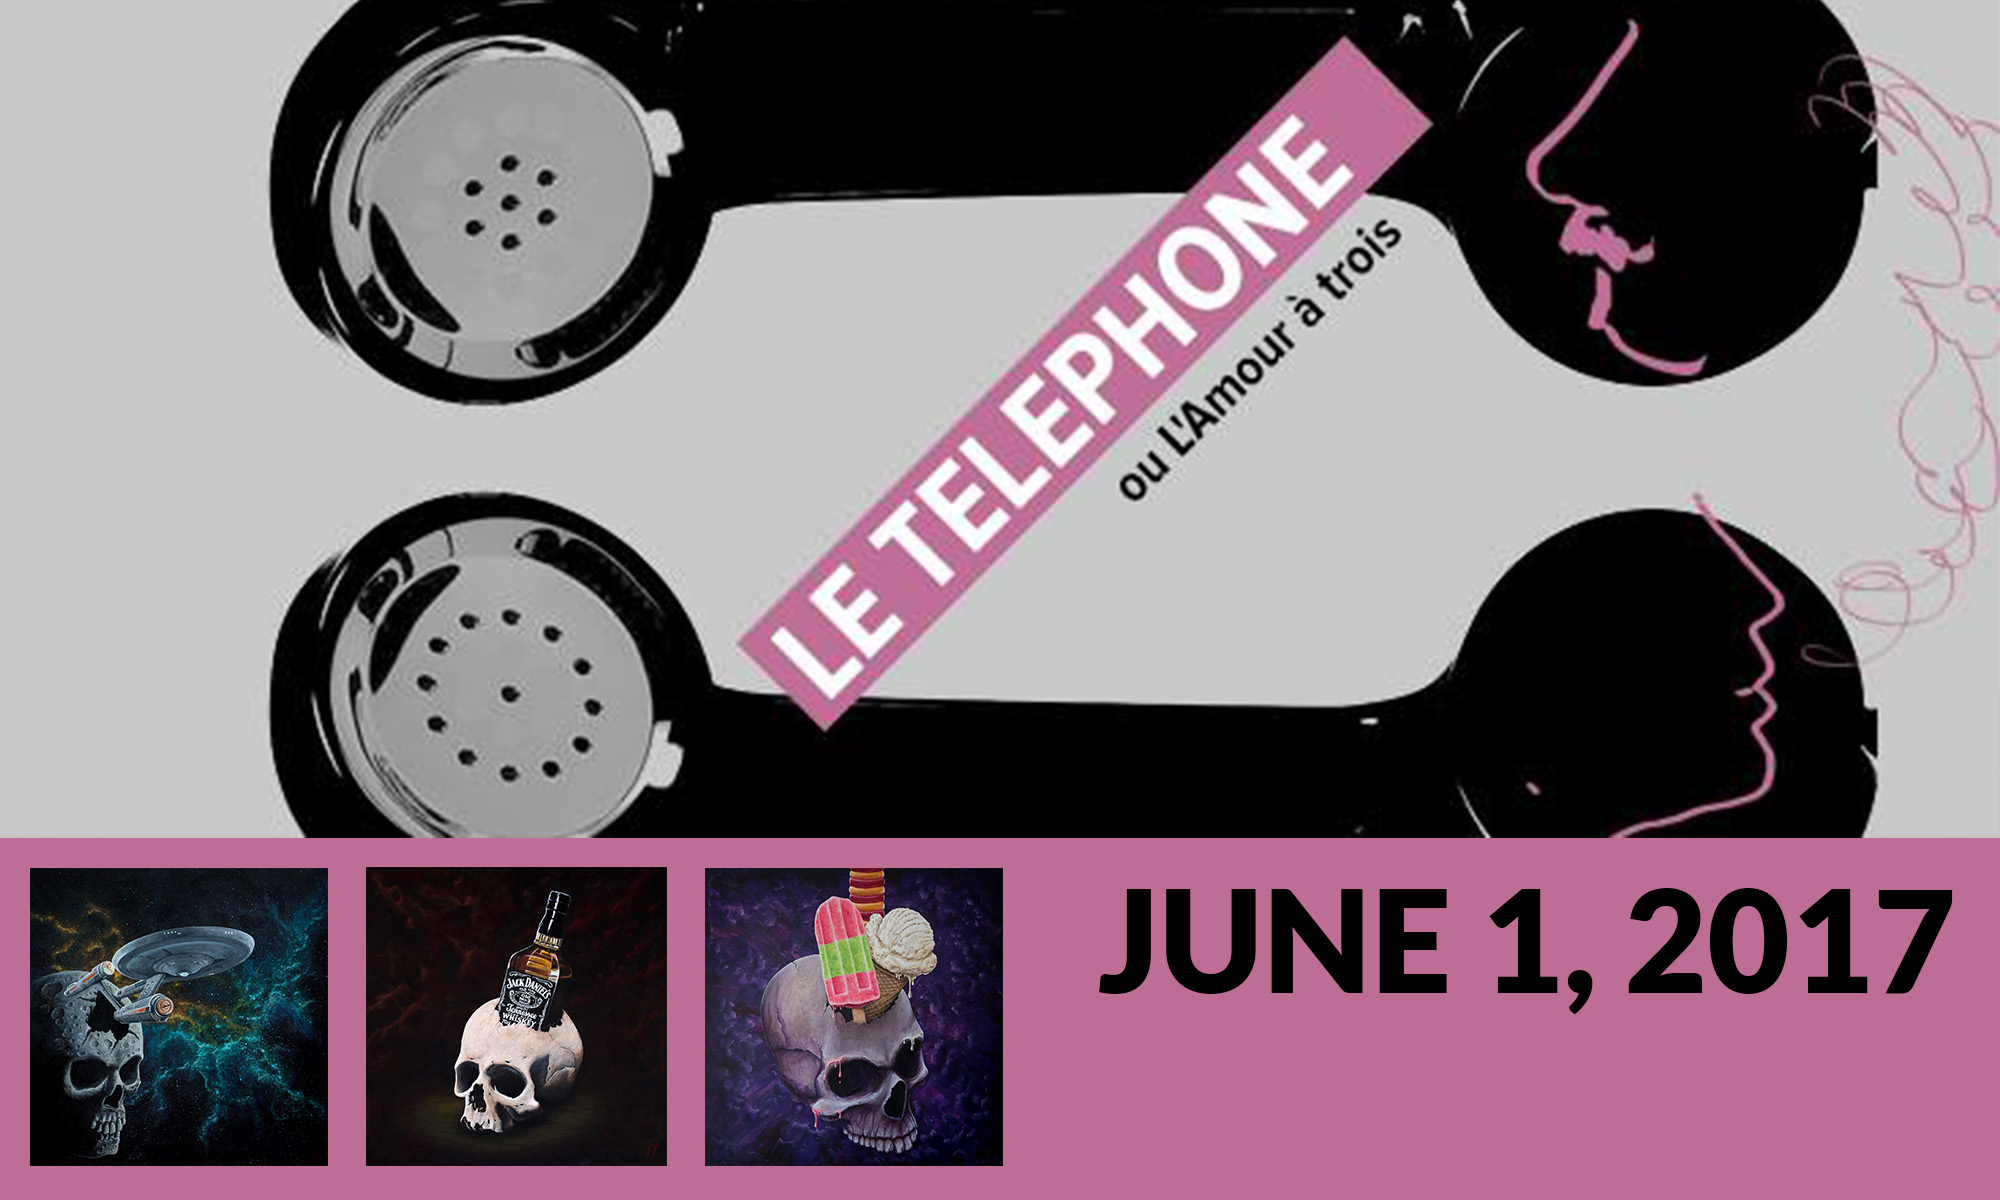 Le Téléphone - Hosted by Opéra Outside The Box